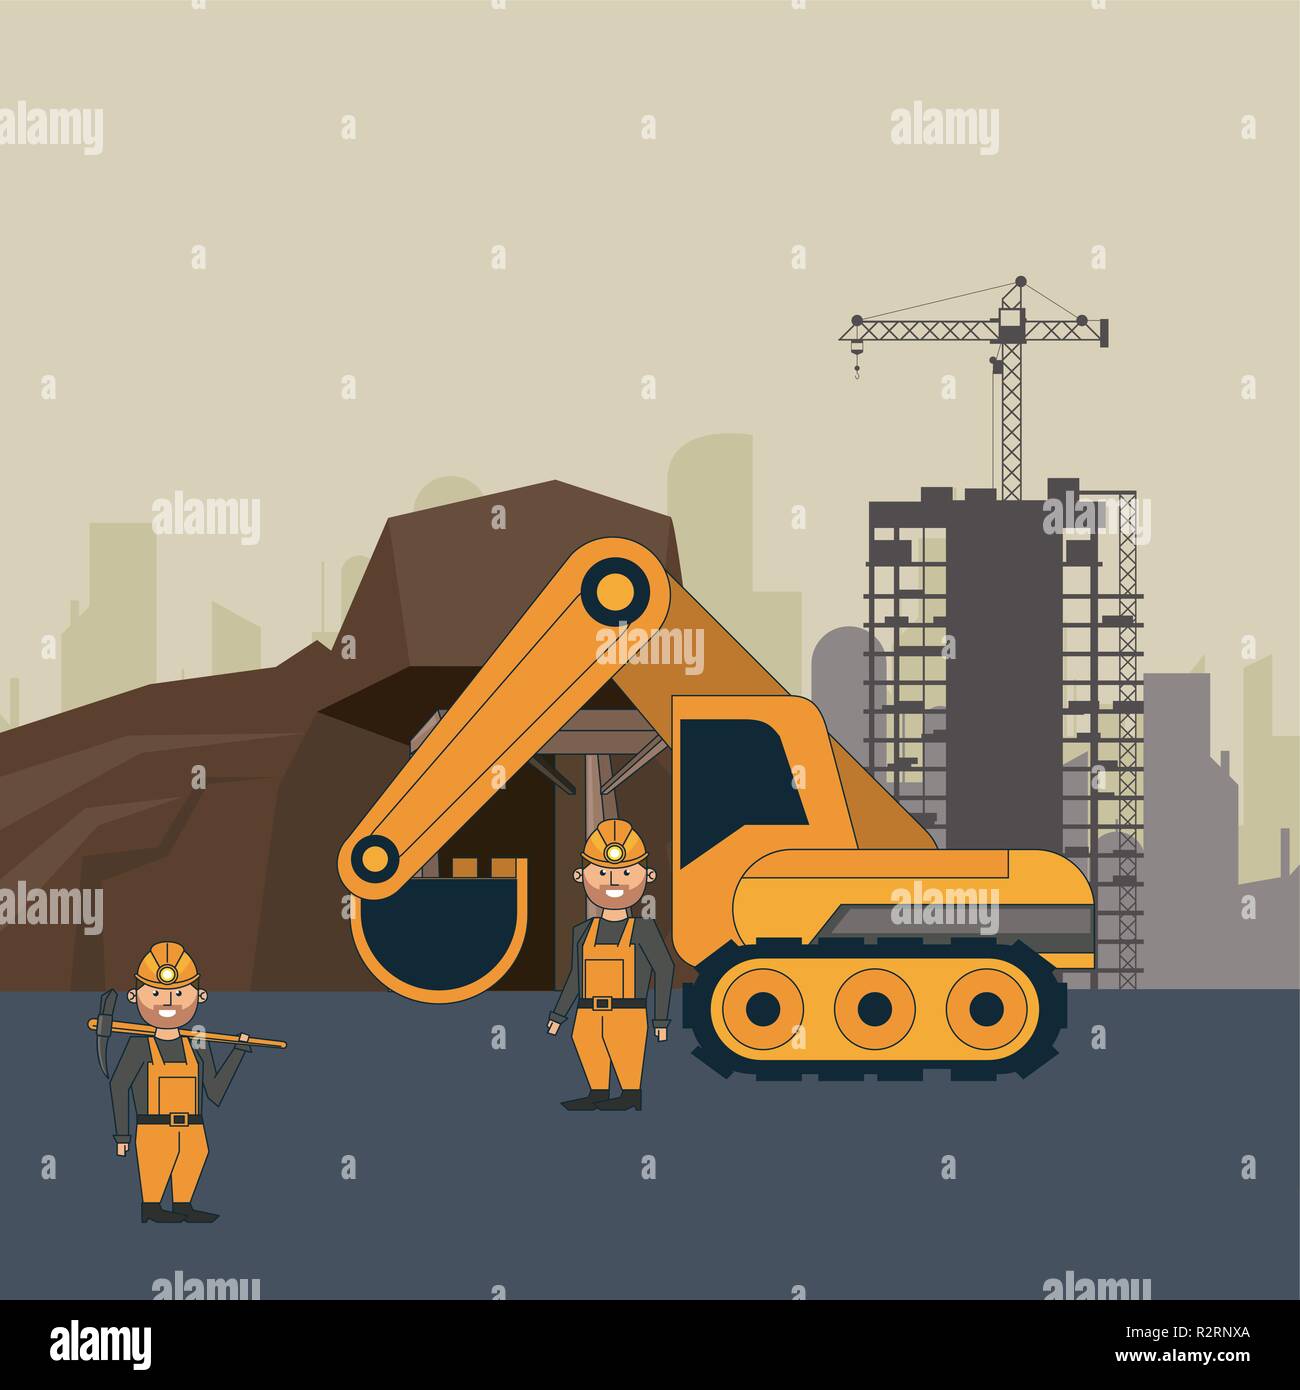 Ming cave with workers and backhoe over construction zone vector illustration graphic design Stock Vector